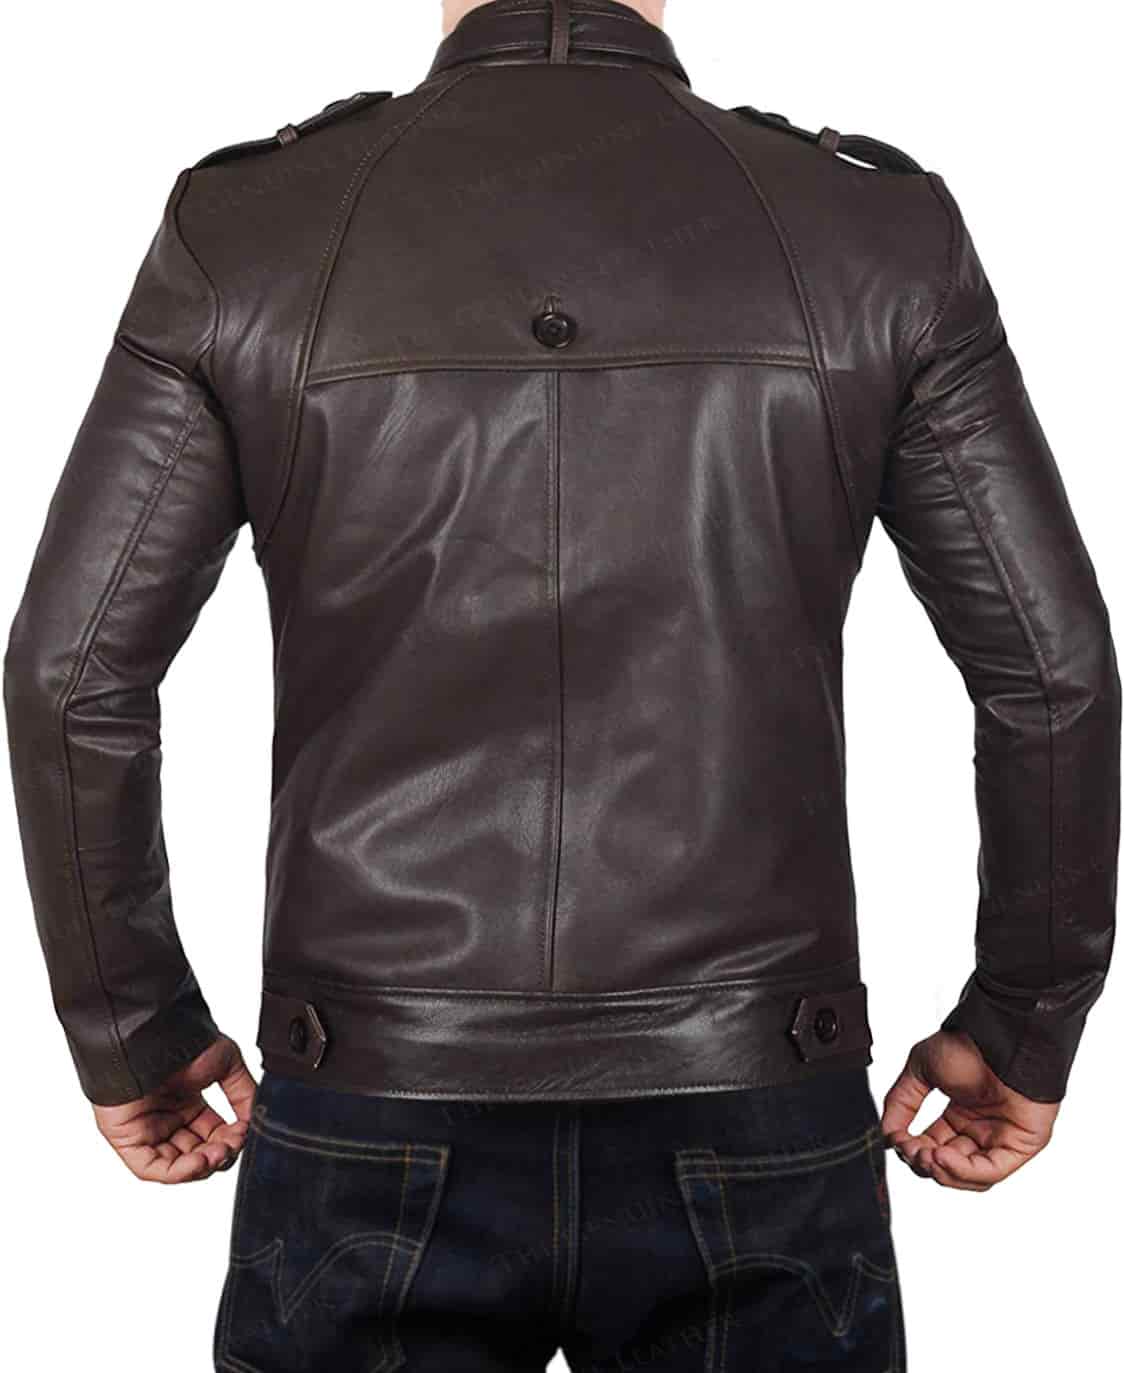 Chocolate Brown Leather Jacket for Men